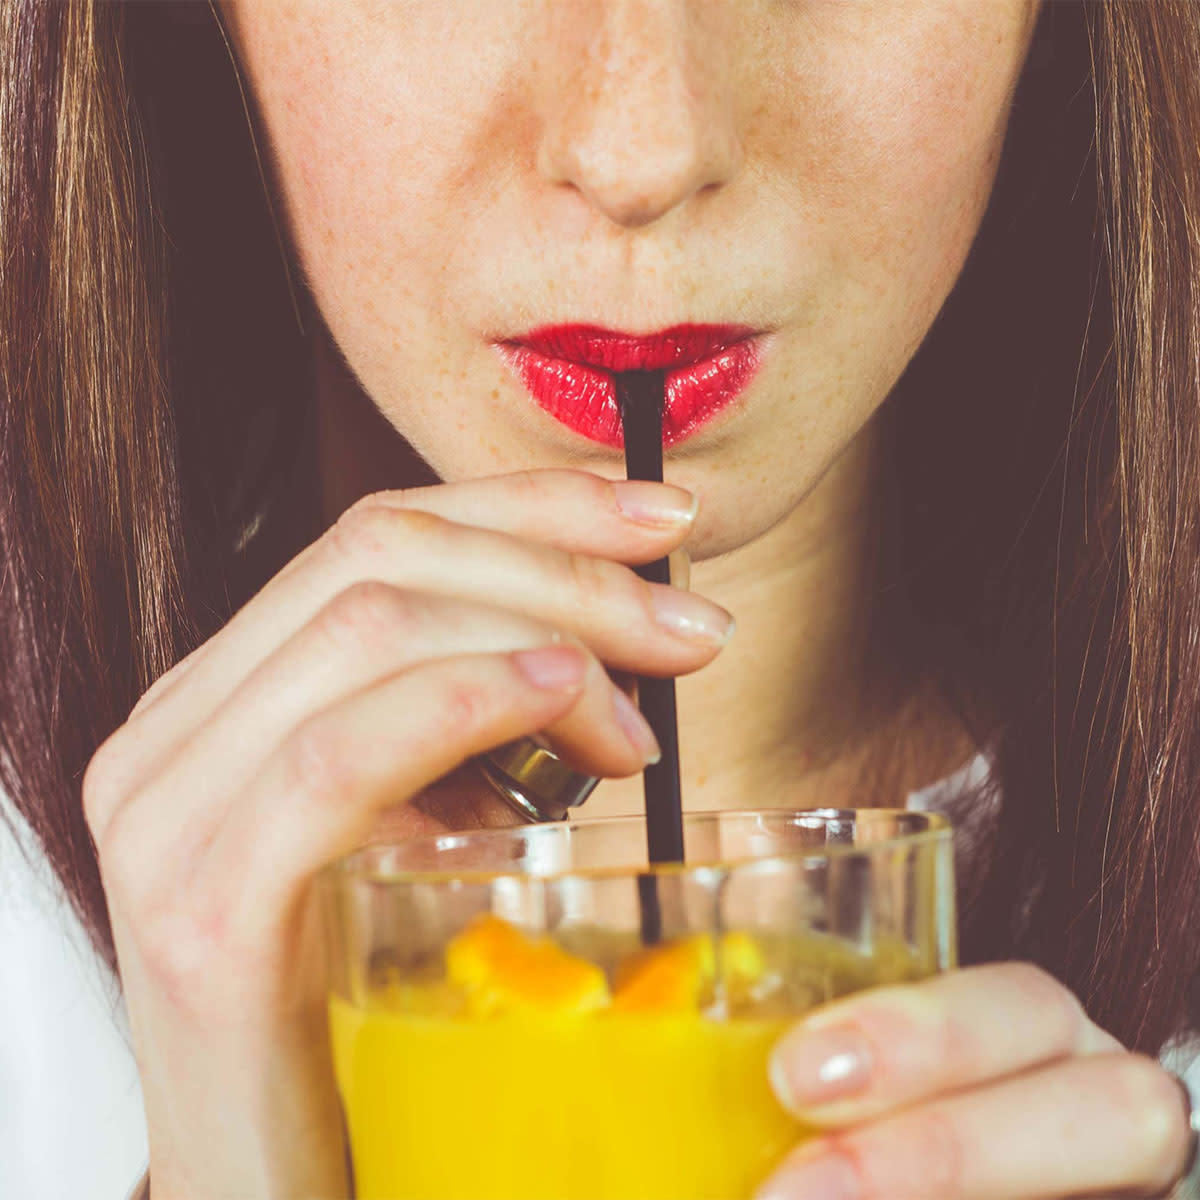 woman sipping on juice straw